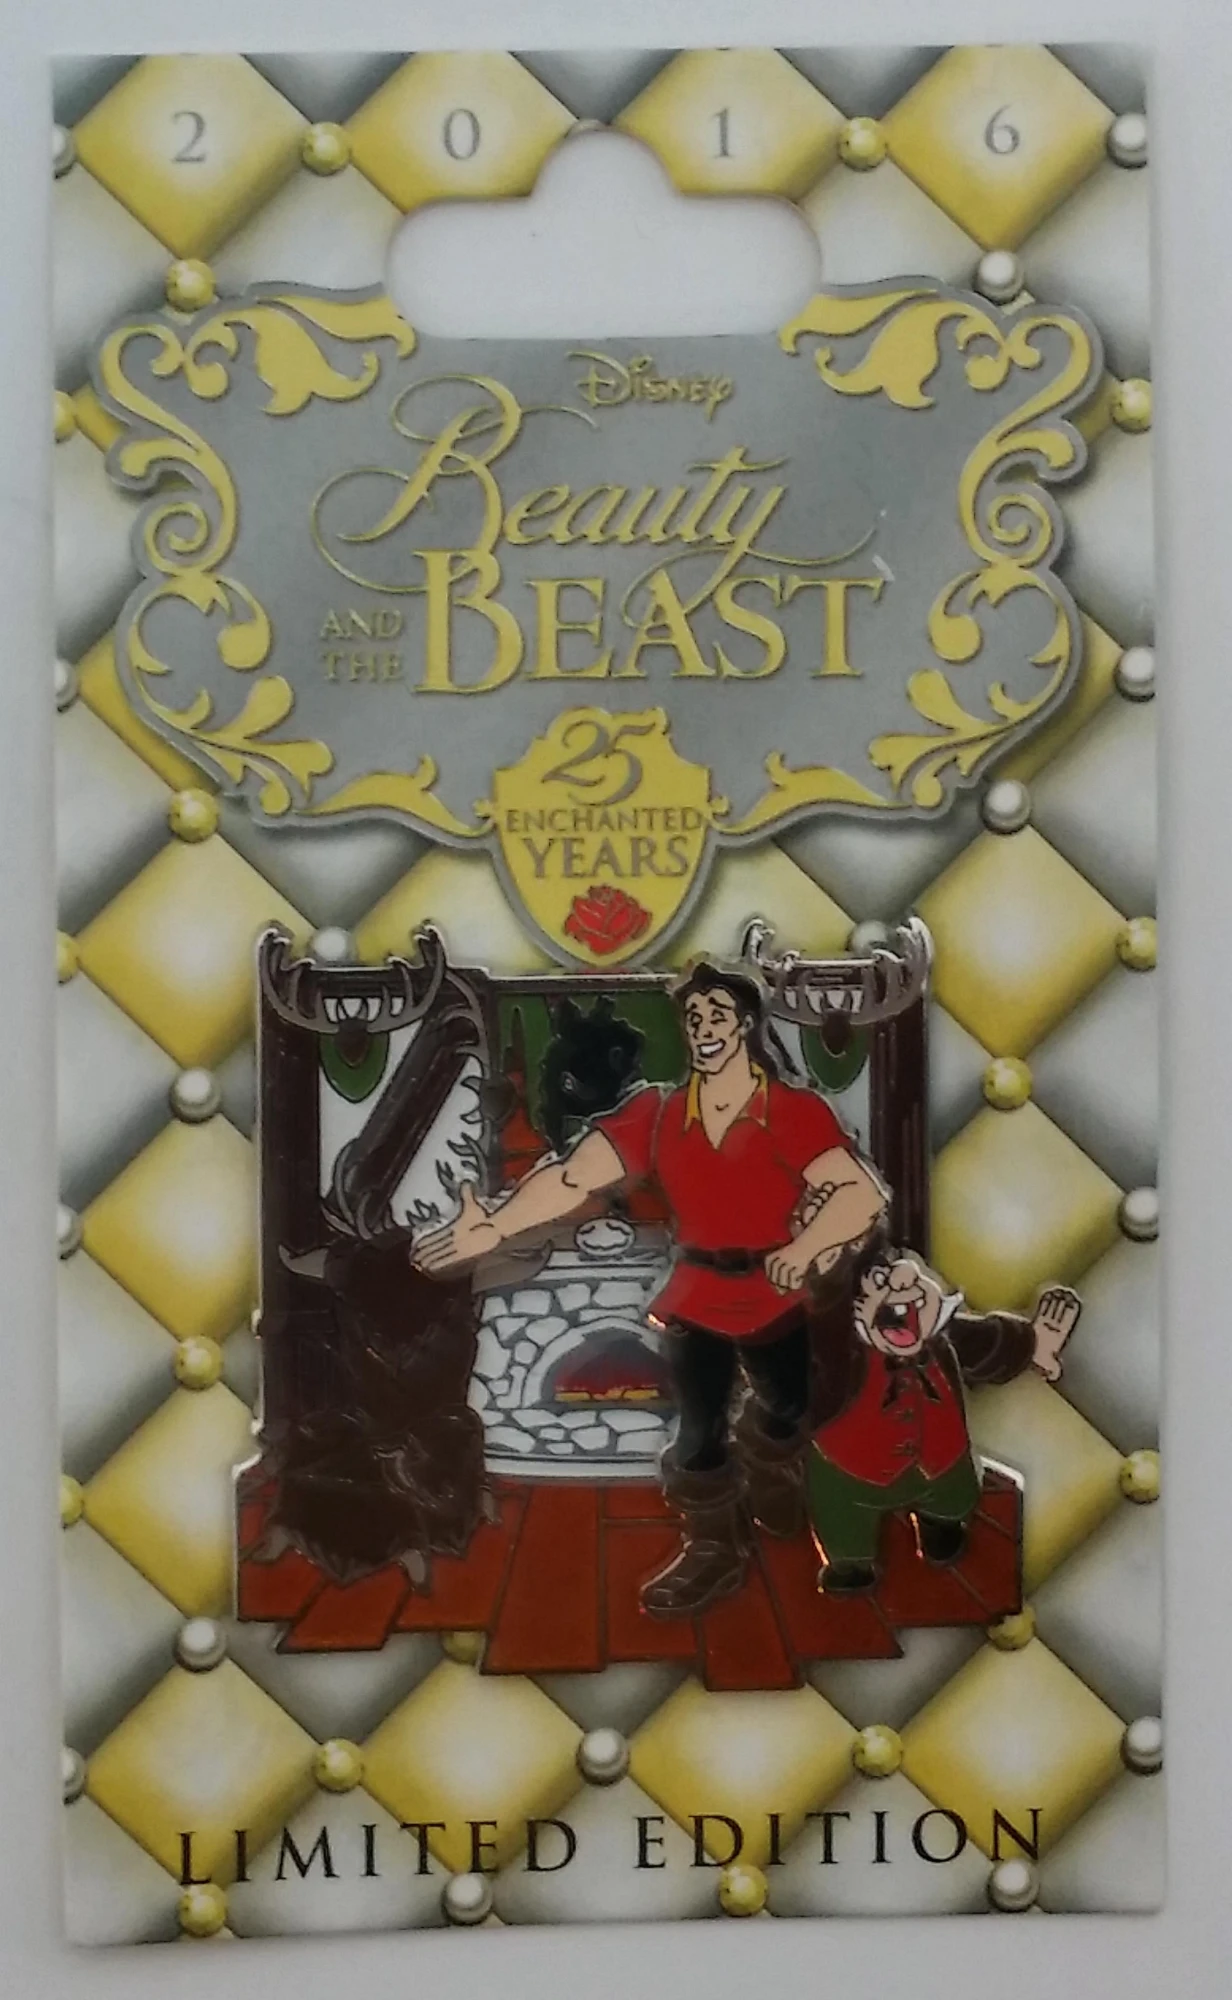 item Disney Pin - Beauty Beast 25 Enchanted Years - Gaston and Le Fou 119171